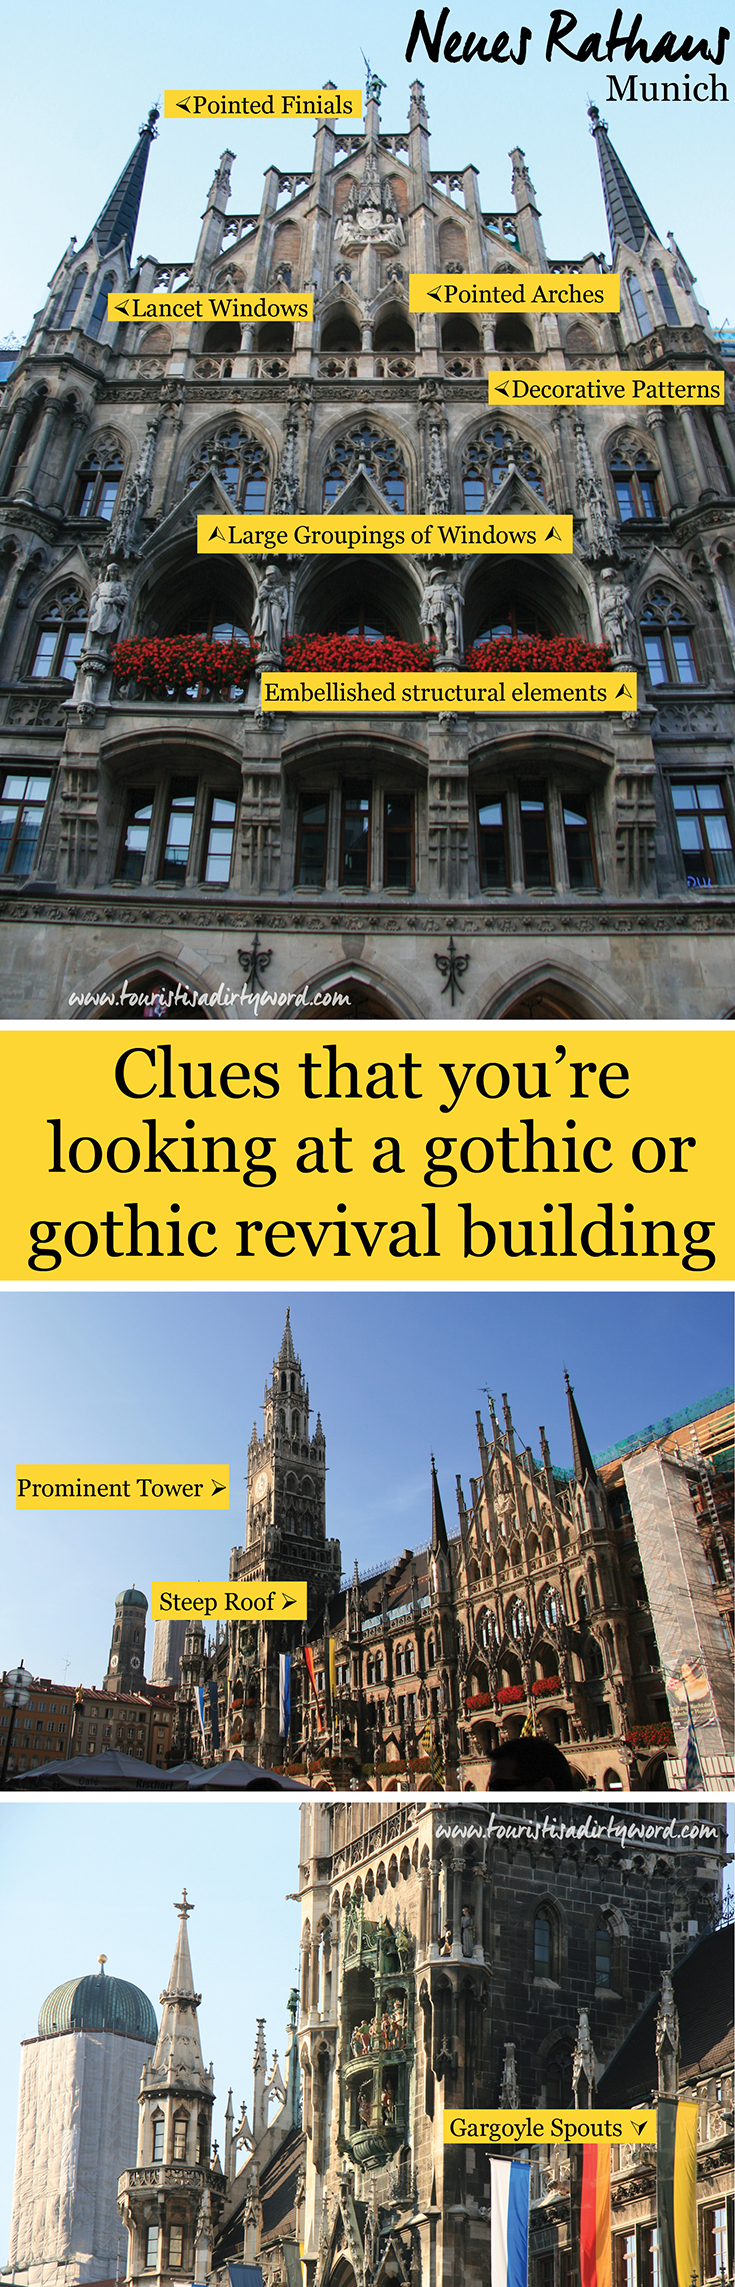 Clues that you're looking at a gothic or gothic revival building • Germany Travel Blog Tourist is a Dirty Word